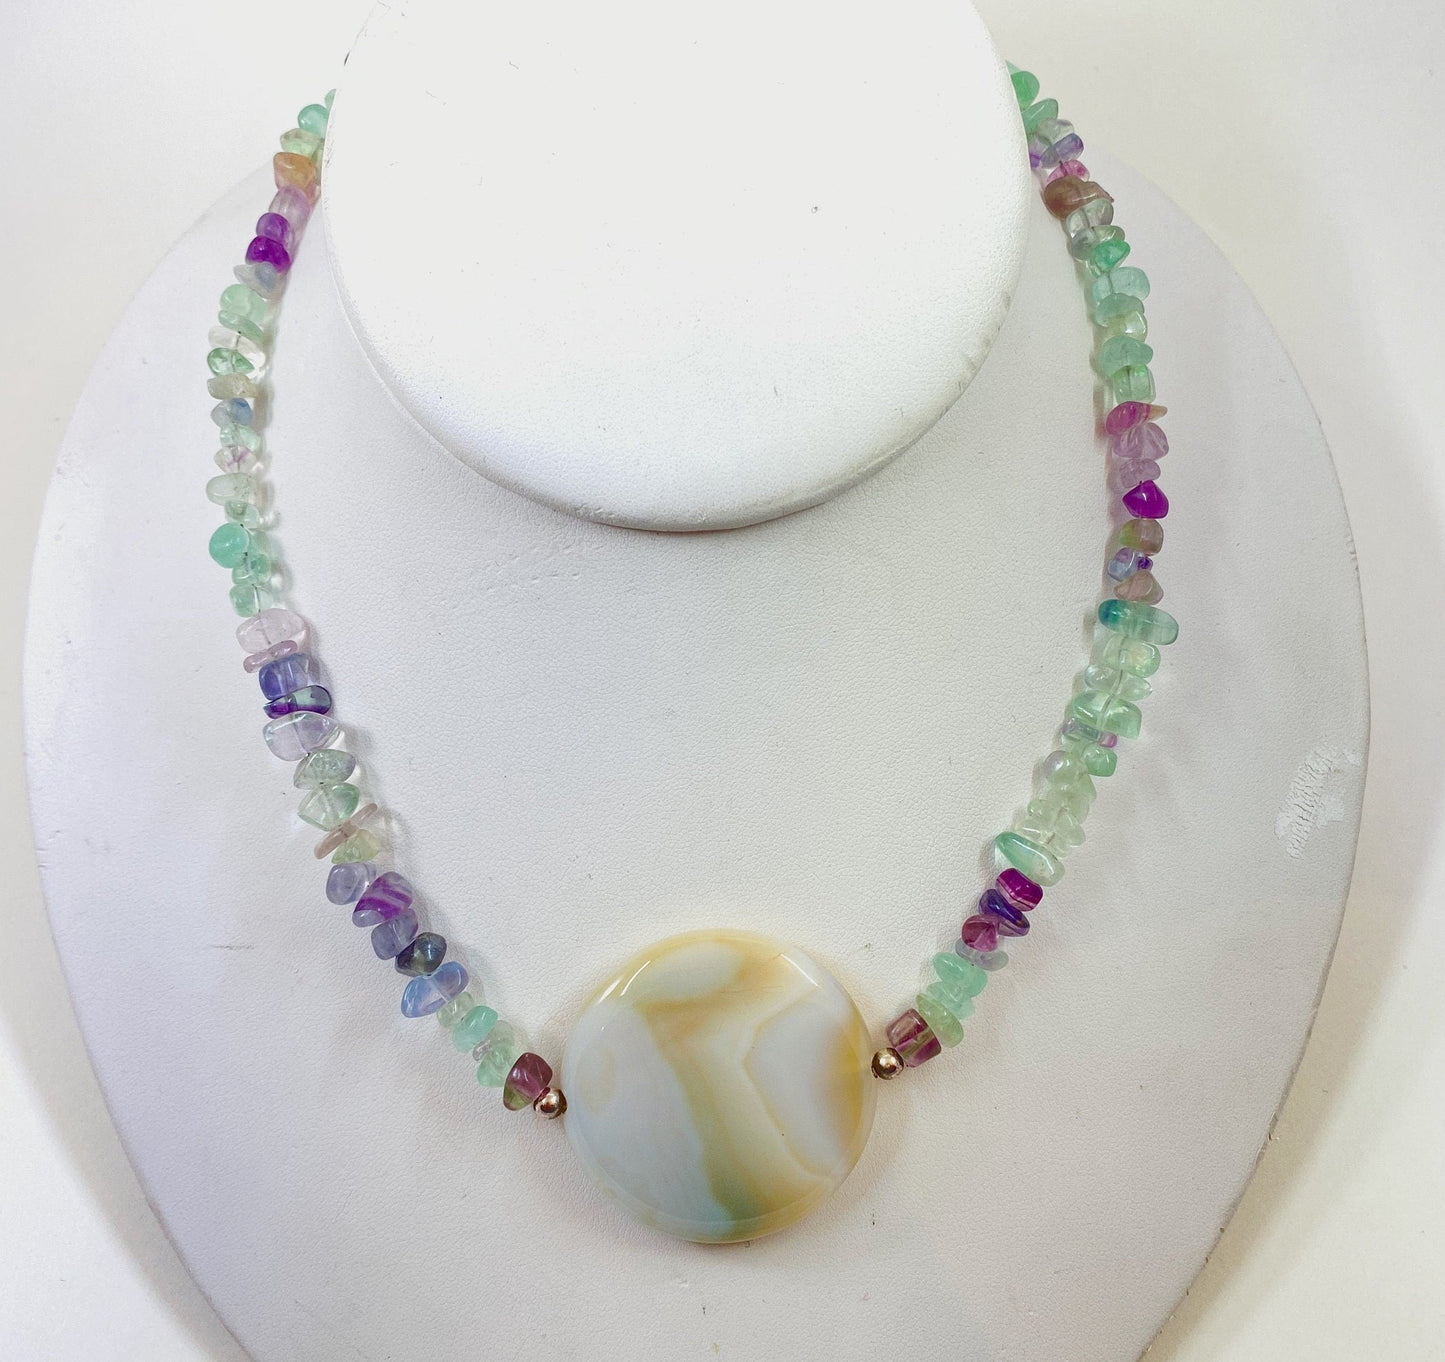 Fluorite and Amazonite beaded necklace. Measures 17" long and is finished with a quality sterling silver toggle clasp.